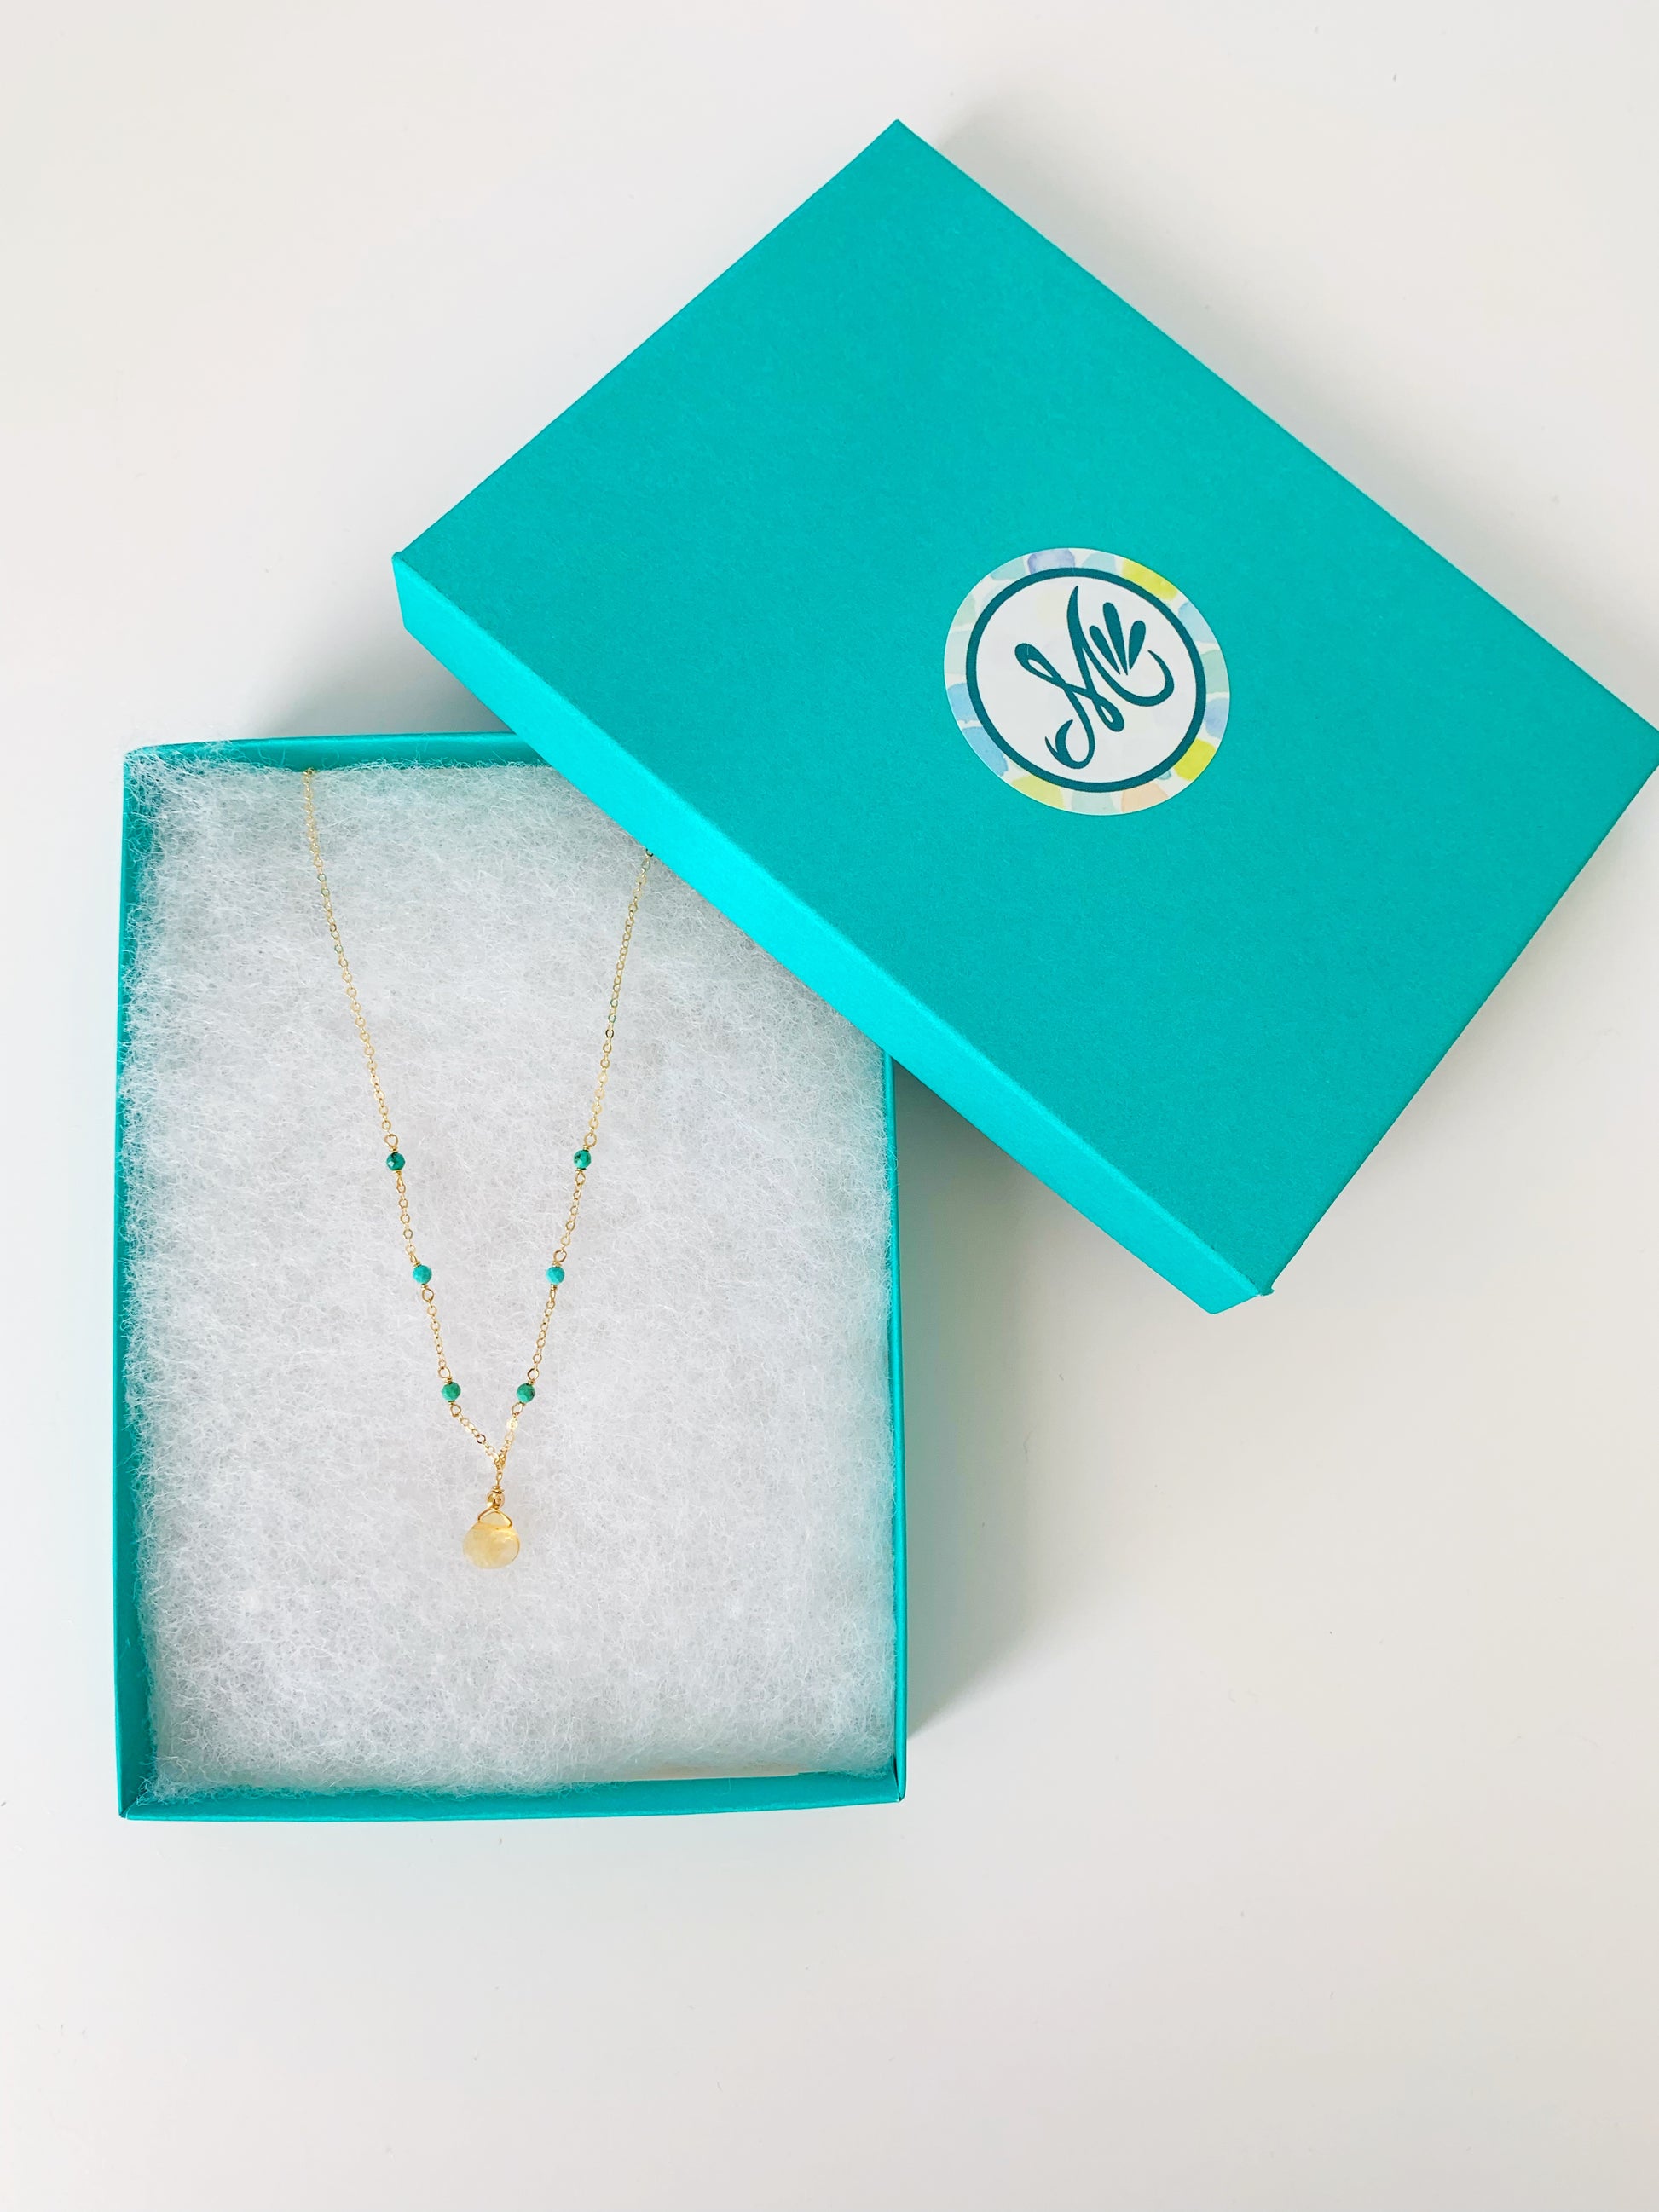 the ray of sunshine necklace photographed in a teal gift box on a white surface